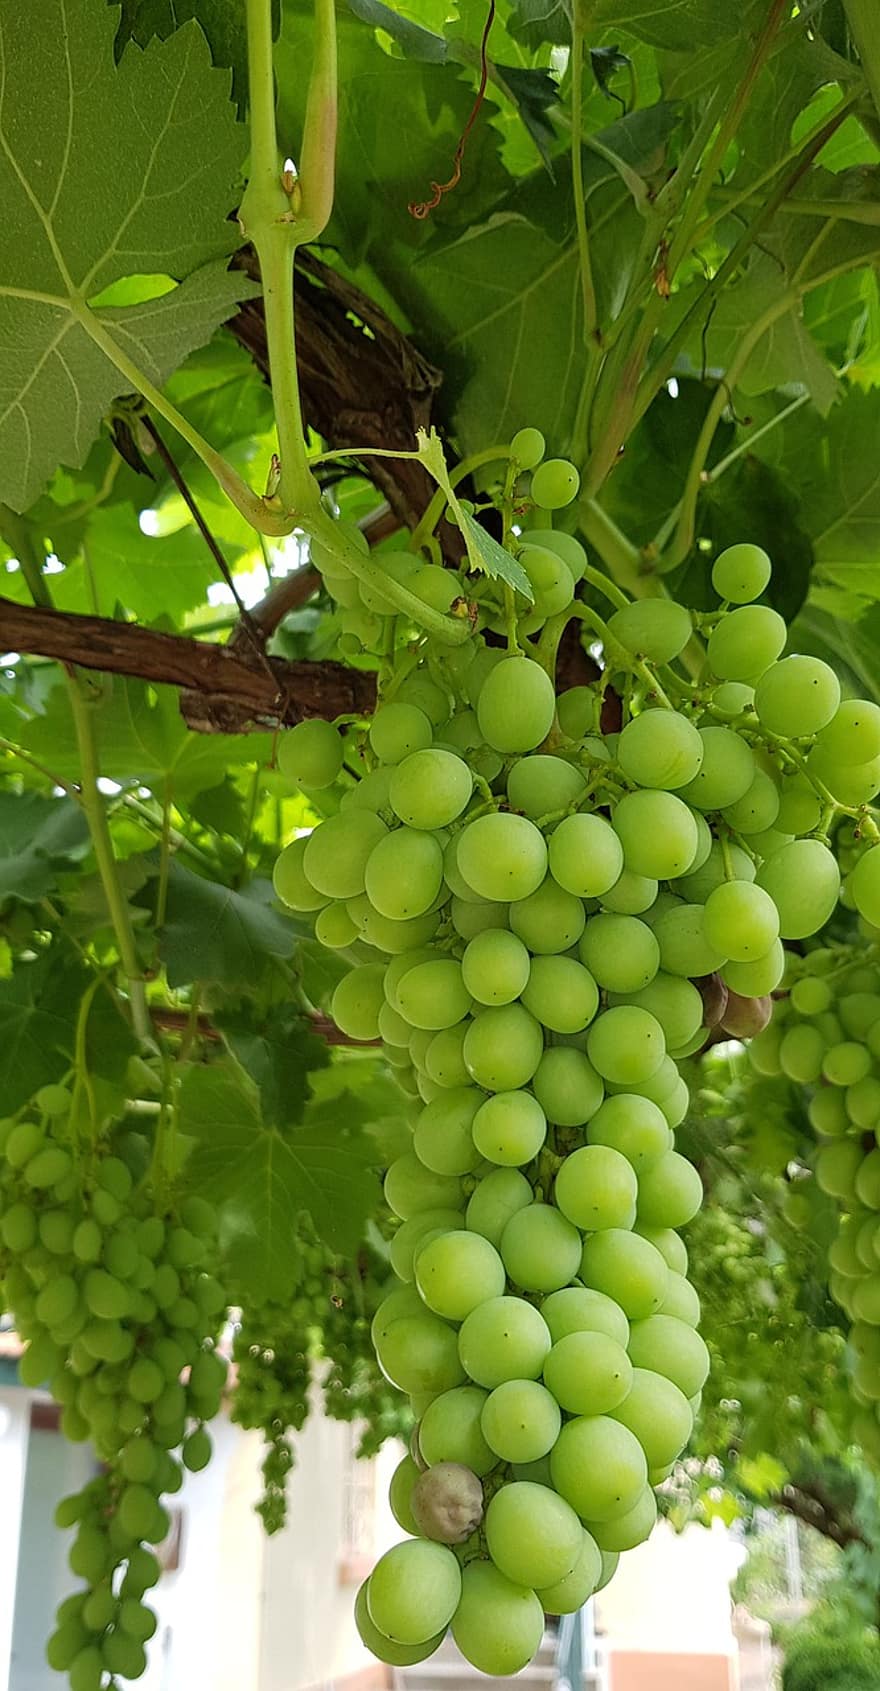 Fruit, Grapes, Organic, Growth, Vitamin, Sweet, grape, leaf, agriculture, green color, freshness